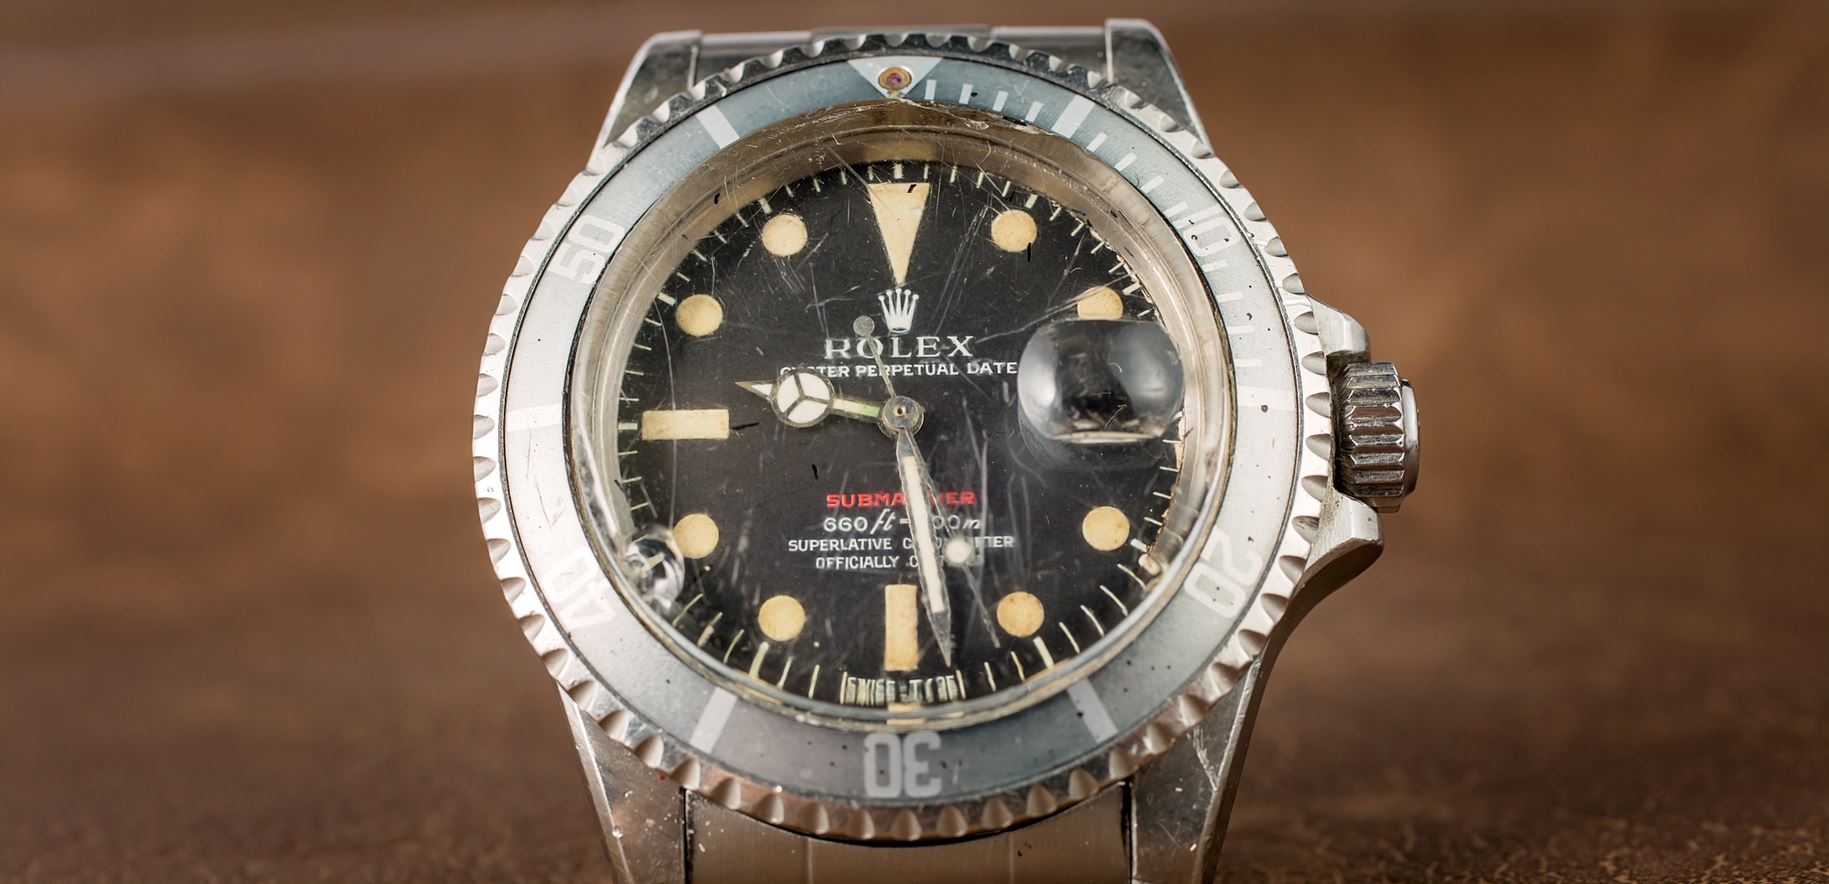 WristReview's Top 5 Vintage Rolex Submariner Watches – WristReview.com –  Featuring Watch Reviews, Critiques, Reports & News